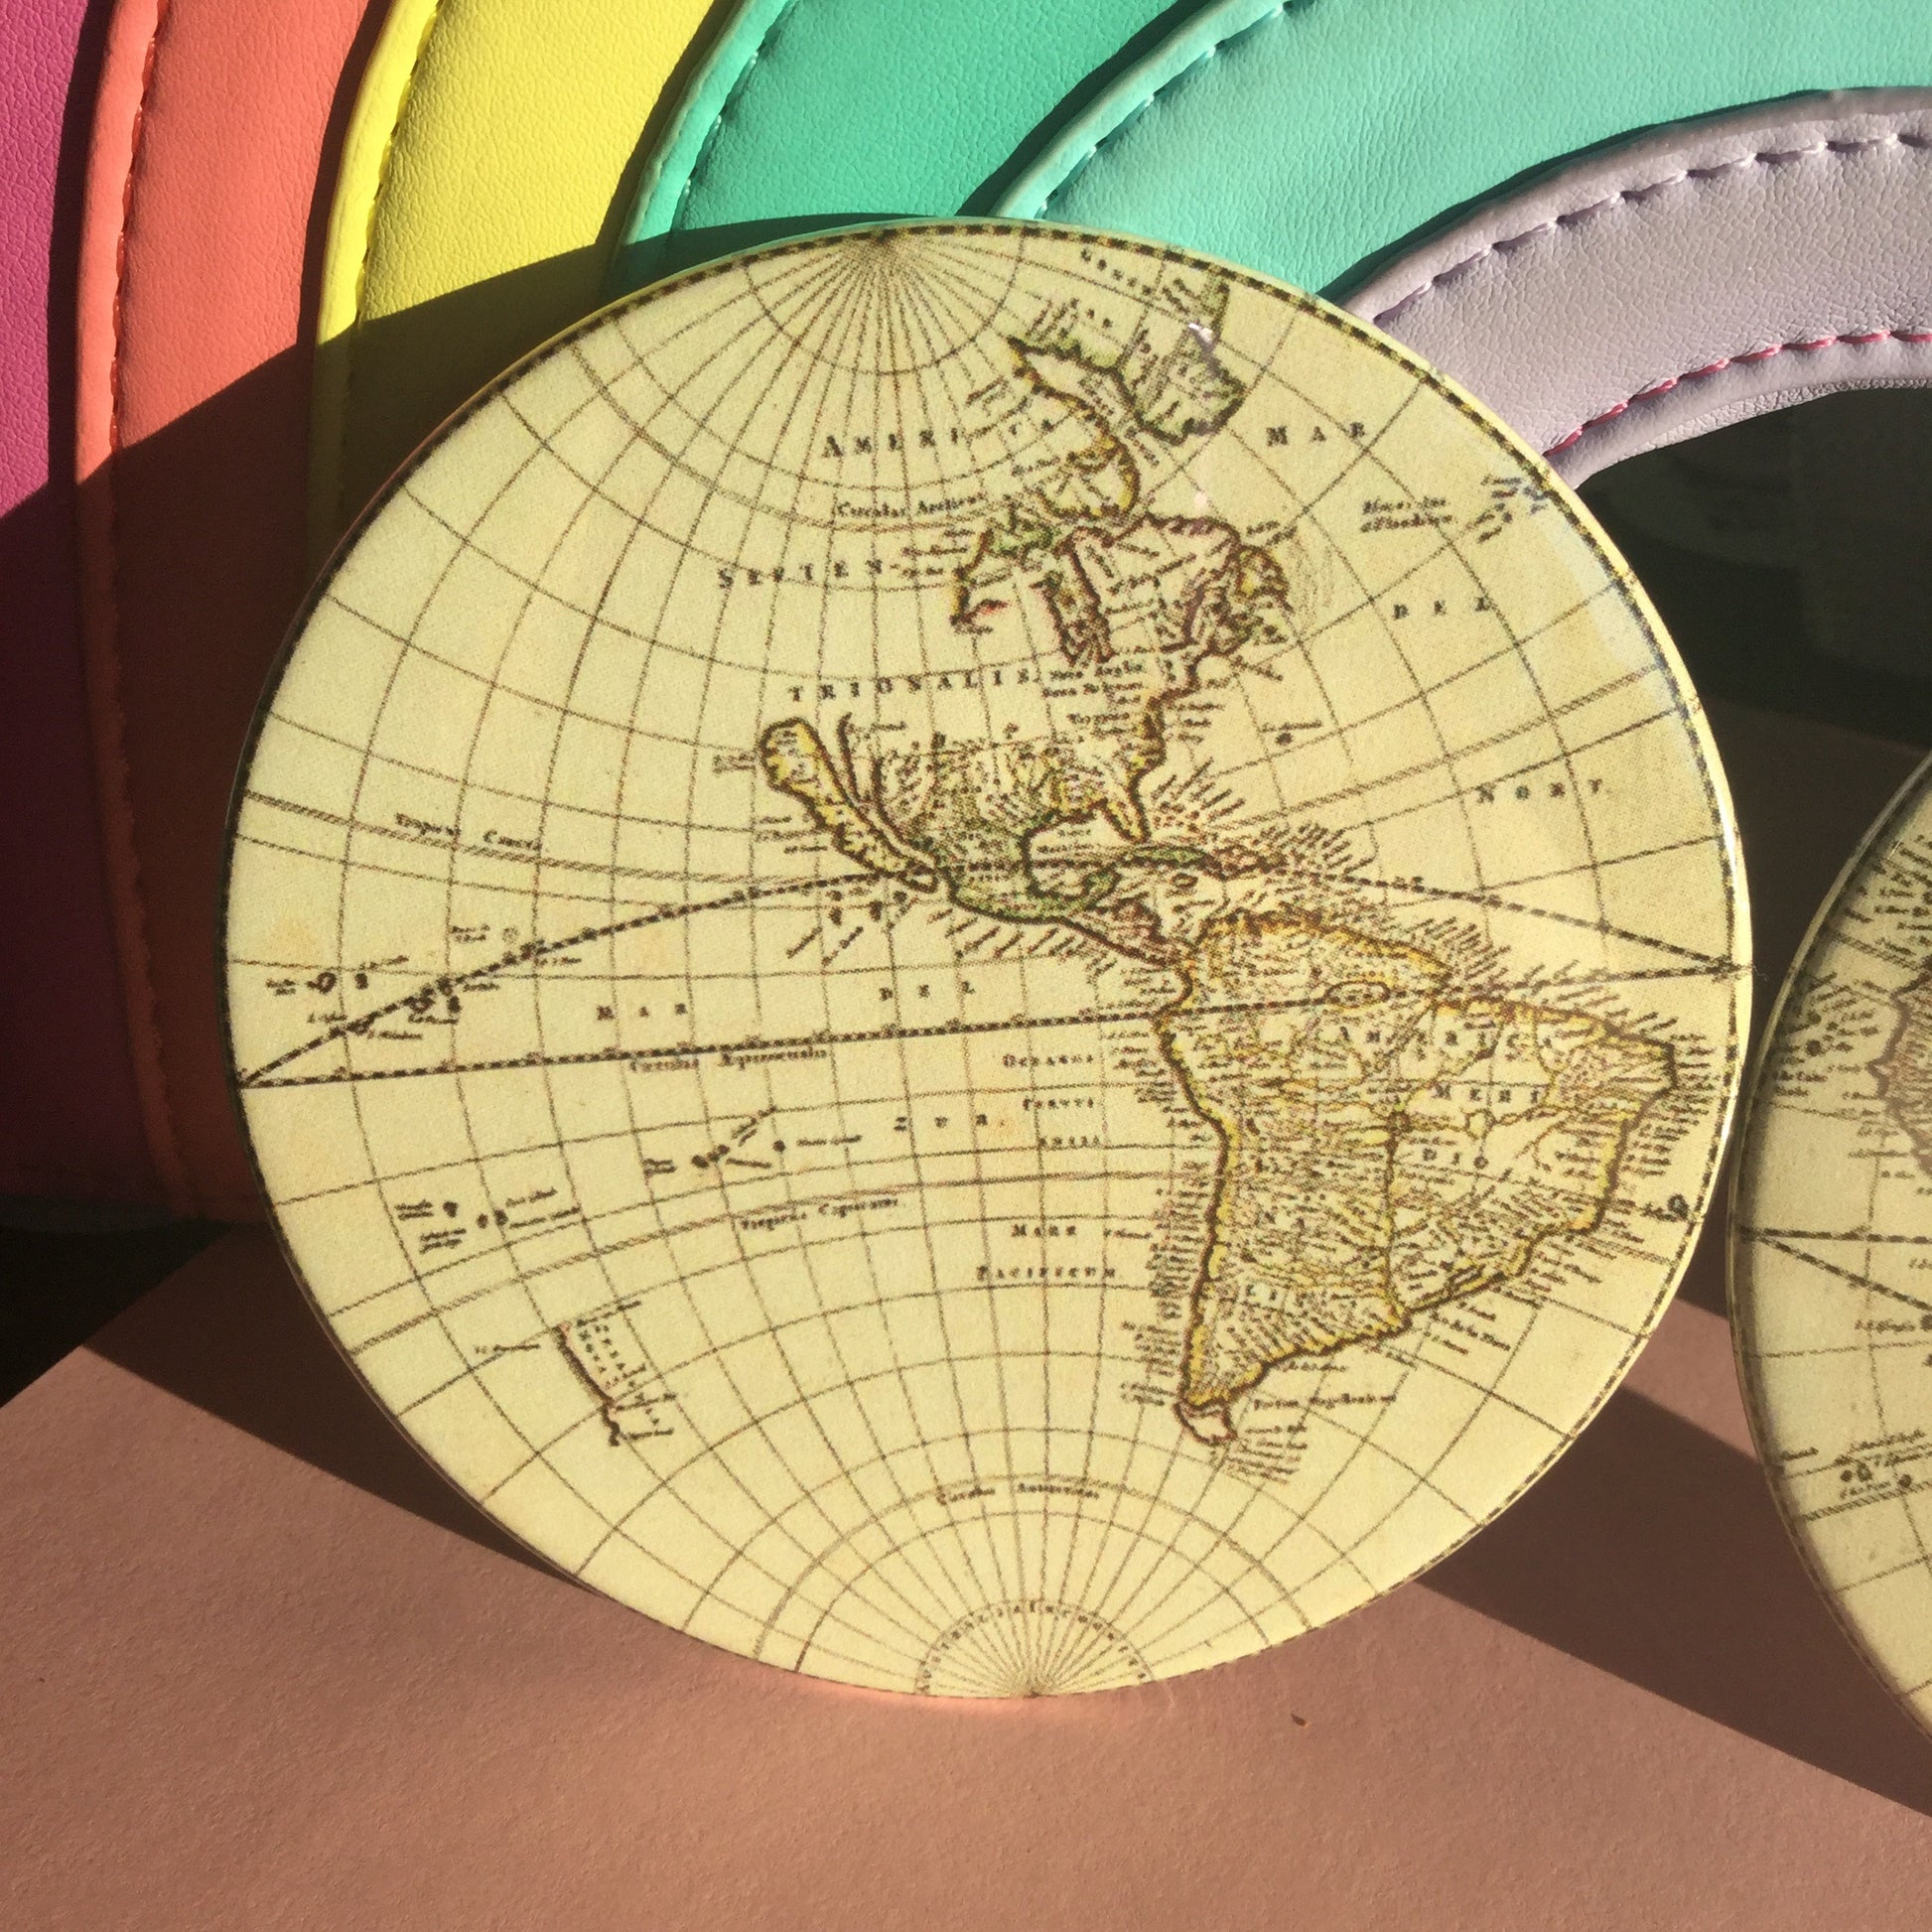 Old world map coaster set / World map drink coasters - Radical Buttons